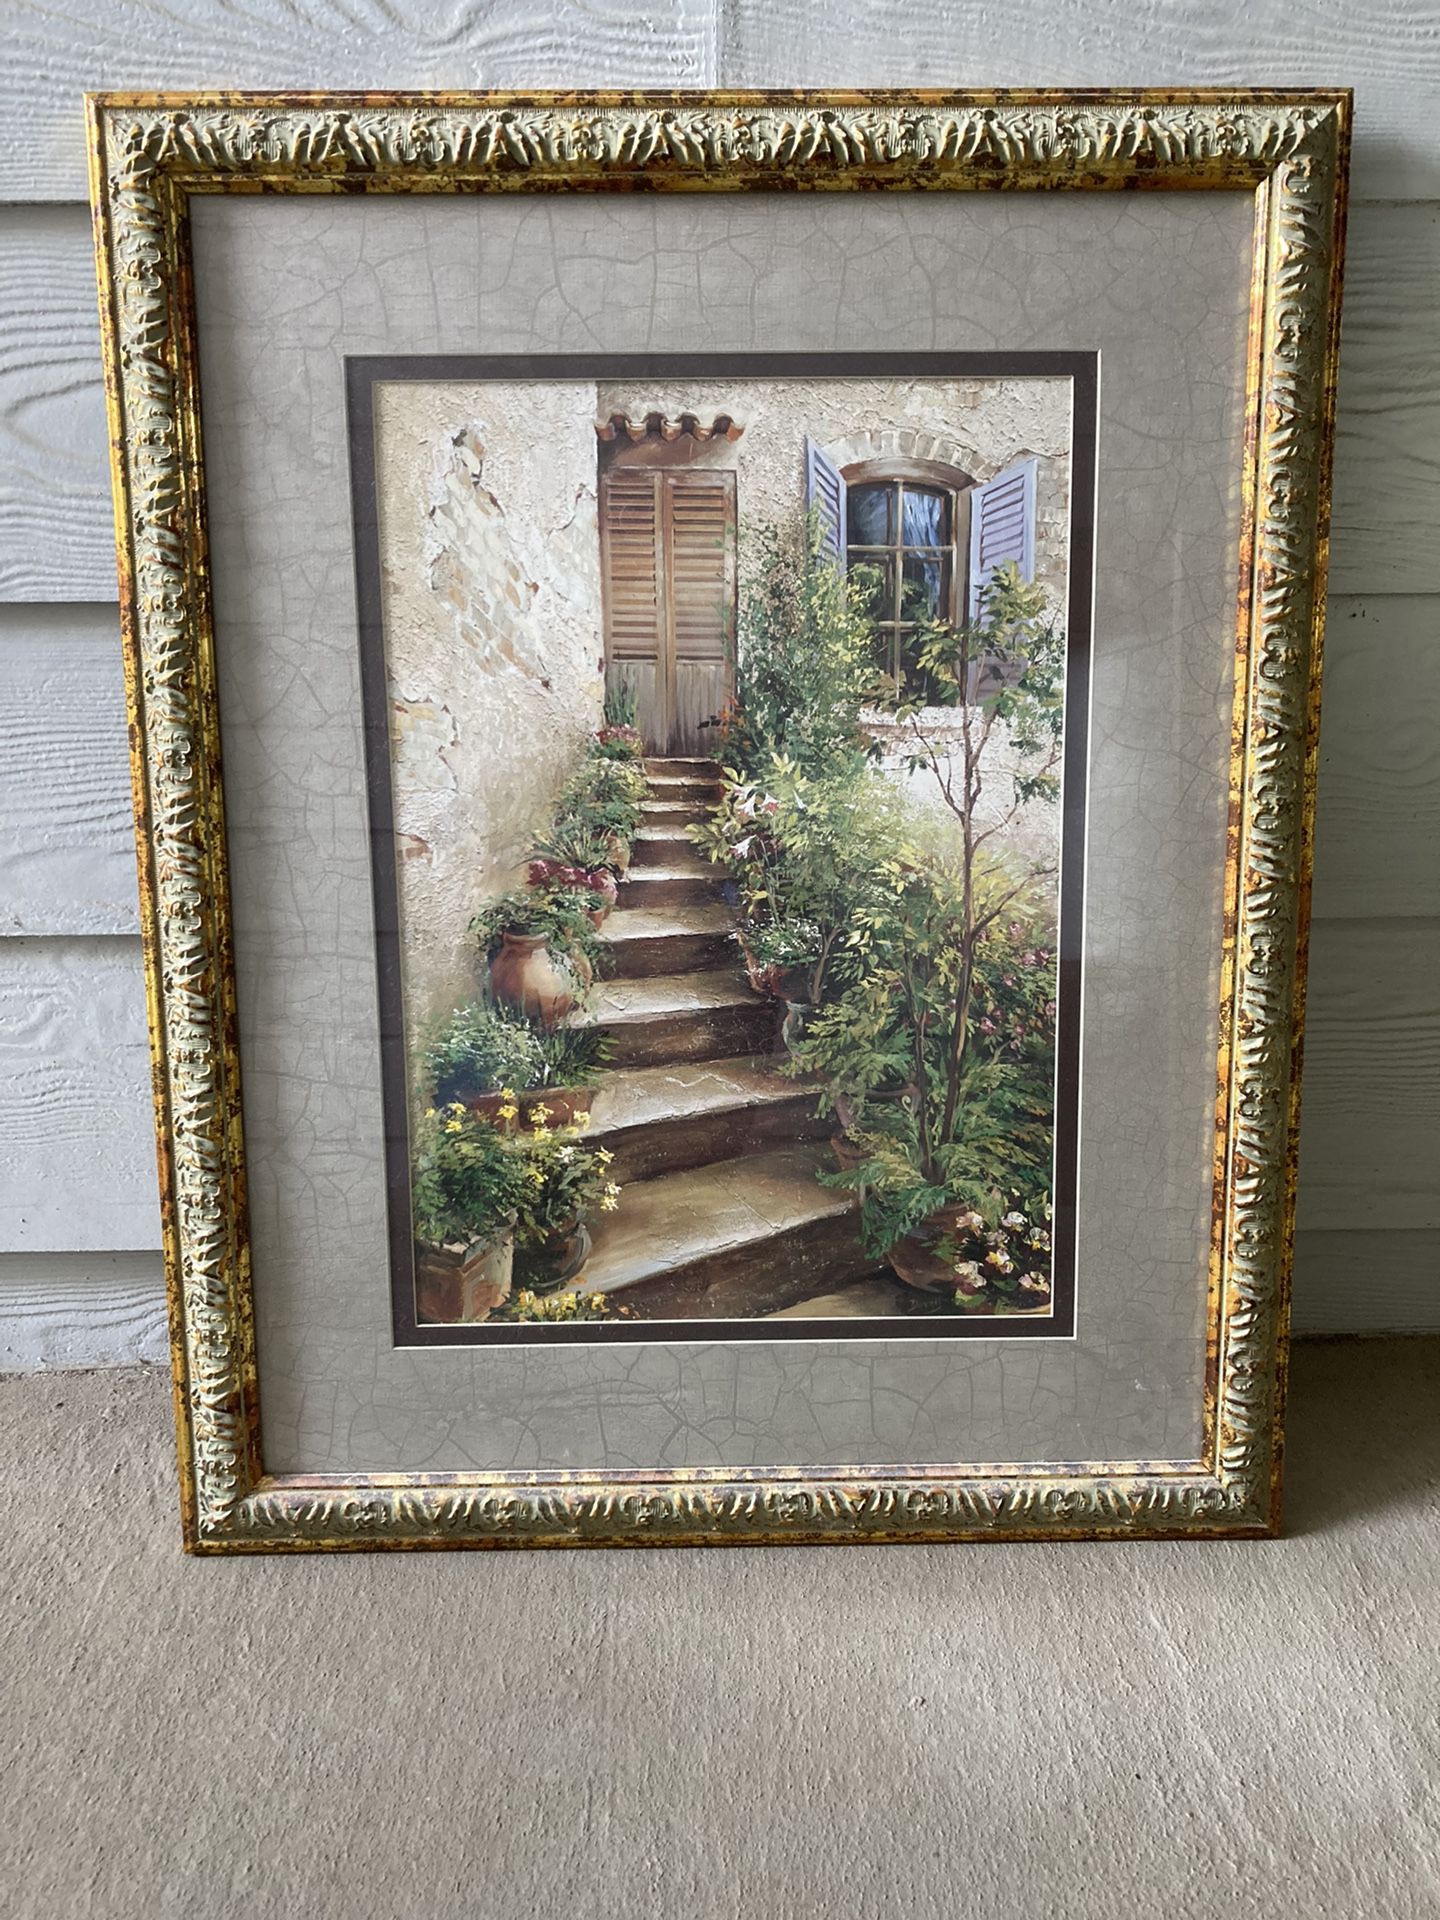 FREE-Beautiful Framed Picture